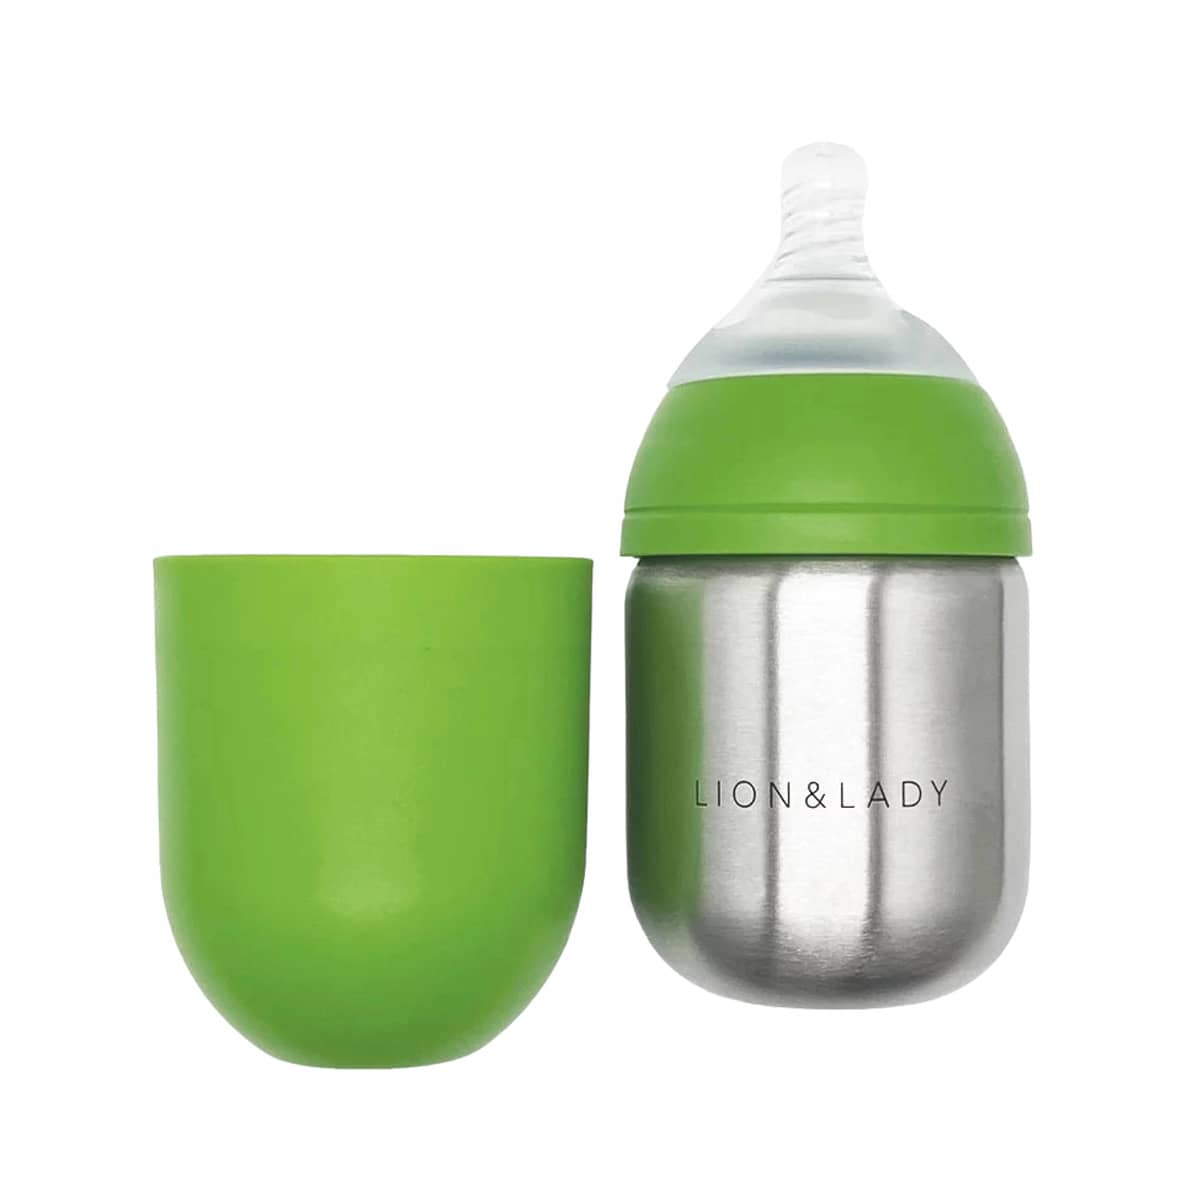 Lion & Lady Stainless Steel Baby Bottle - 210ml - Green Apple